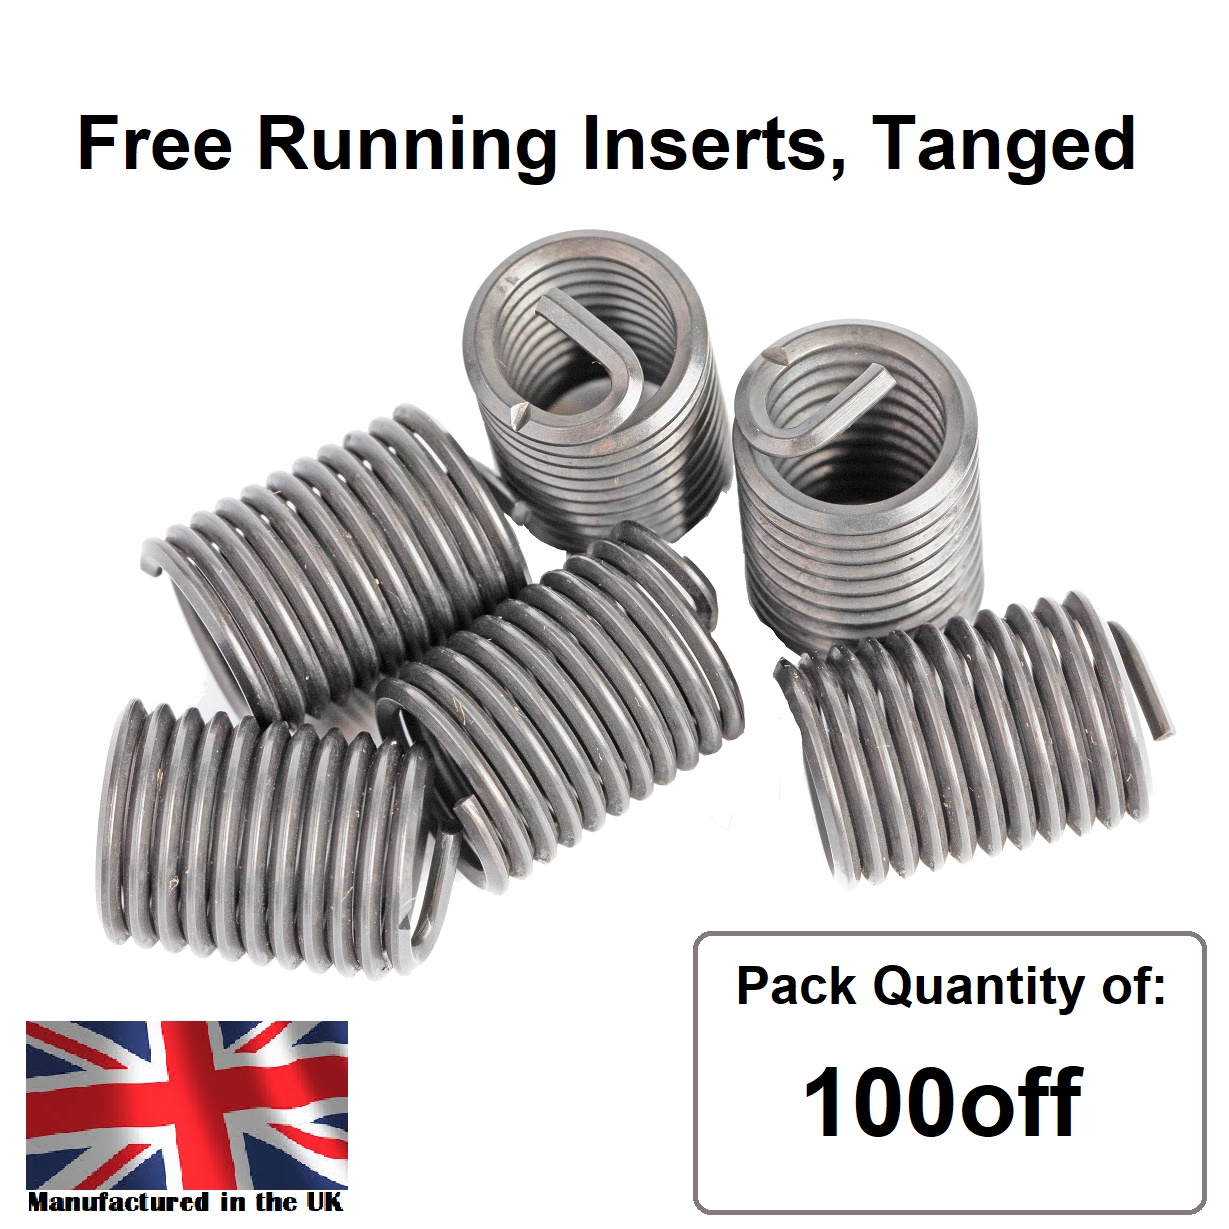 4-40 x 2D UNC, Free Running, Tanged, Wire Thread Repair Insert, 304/A2 Stainless (Pack 100)